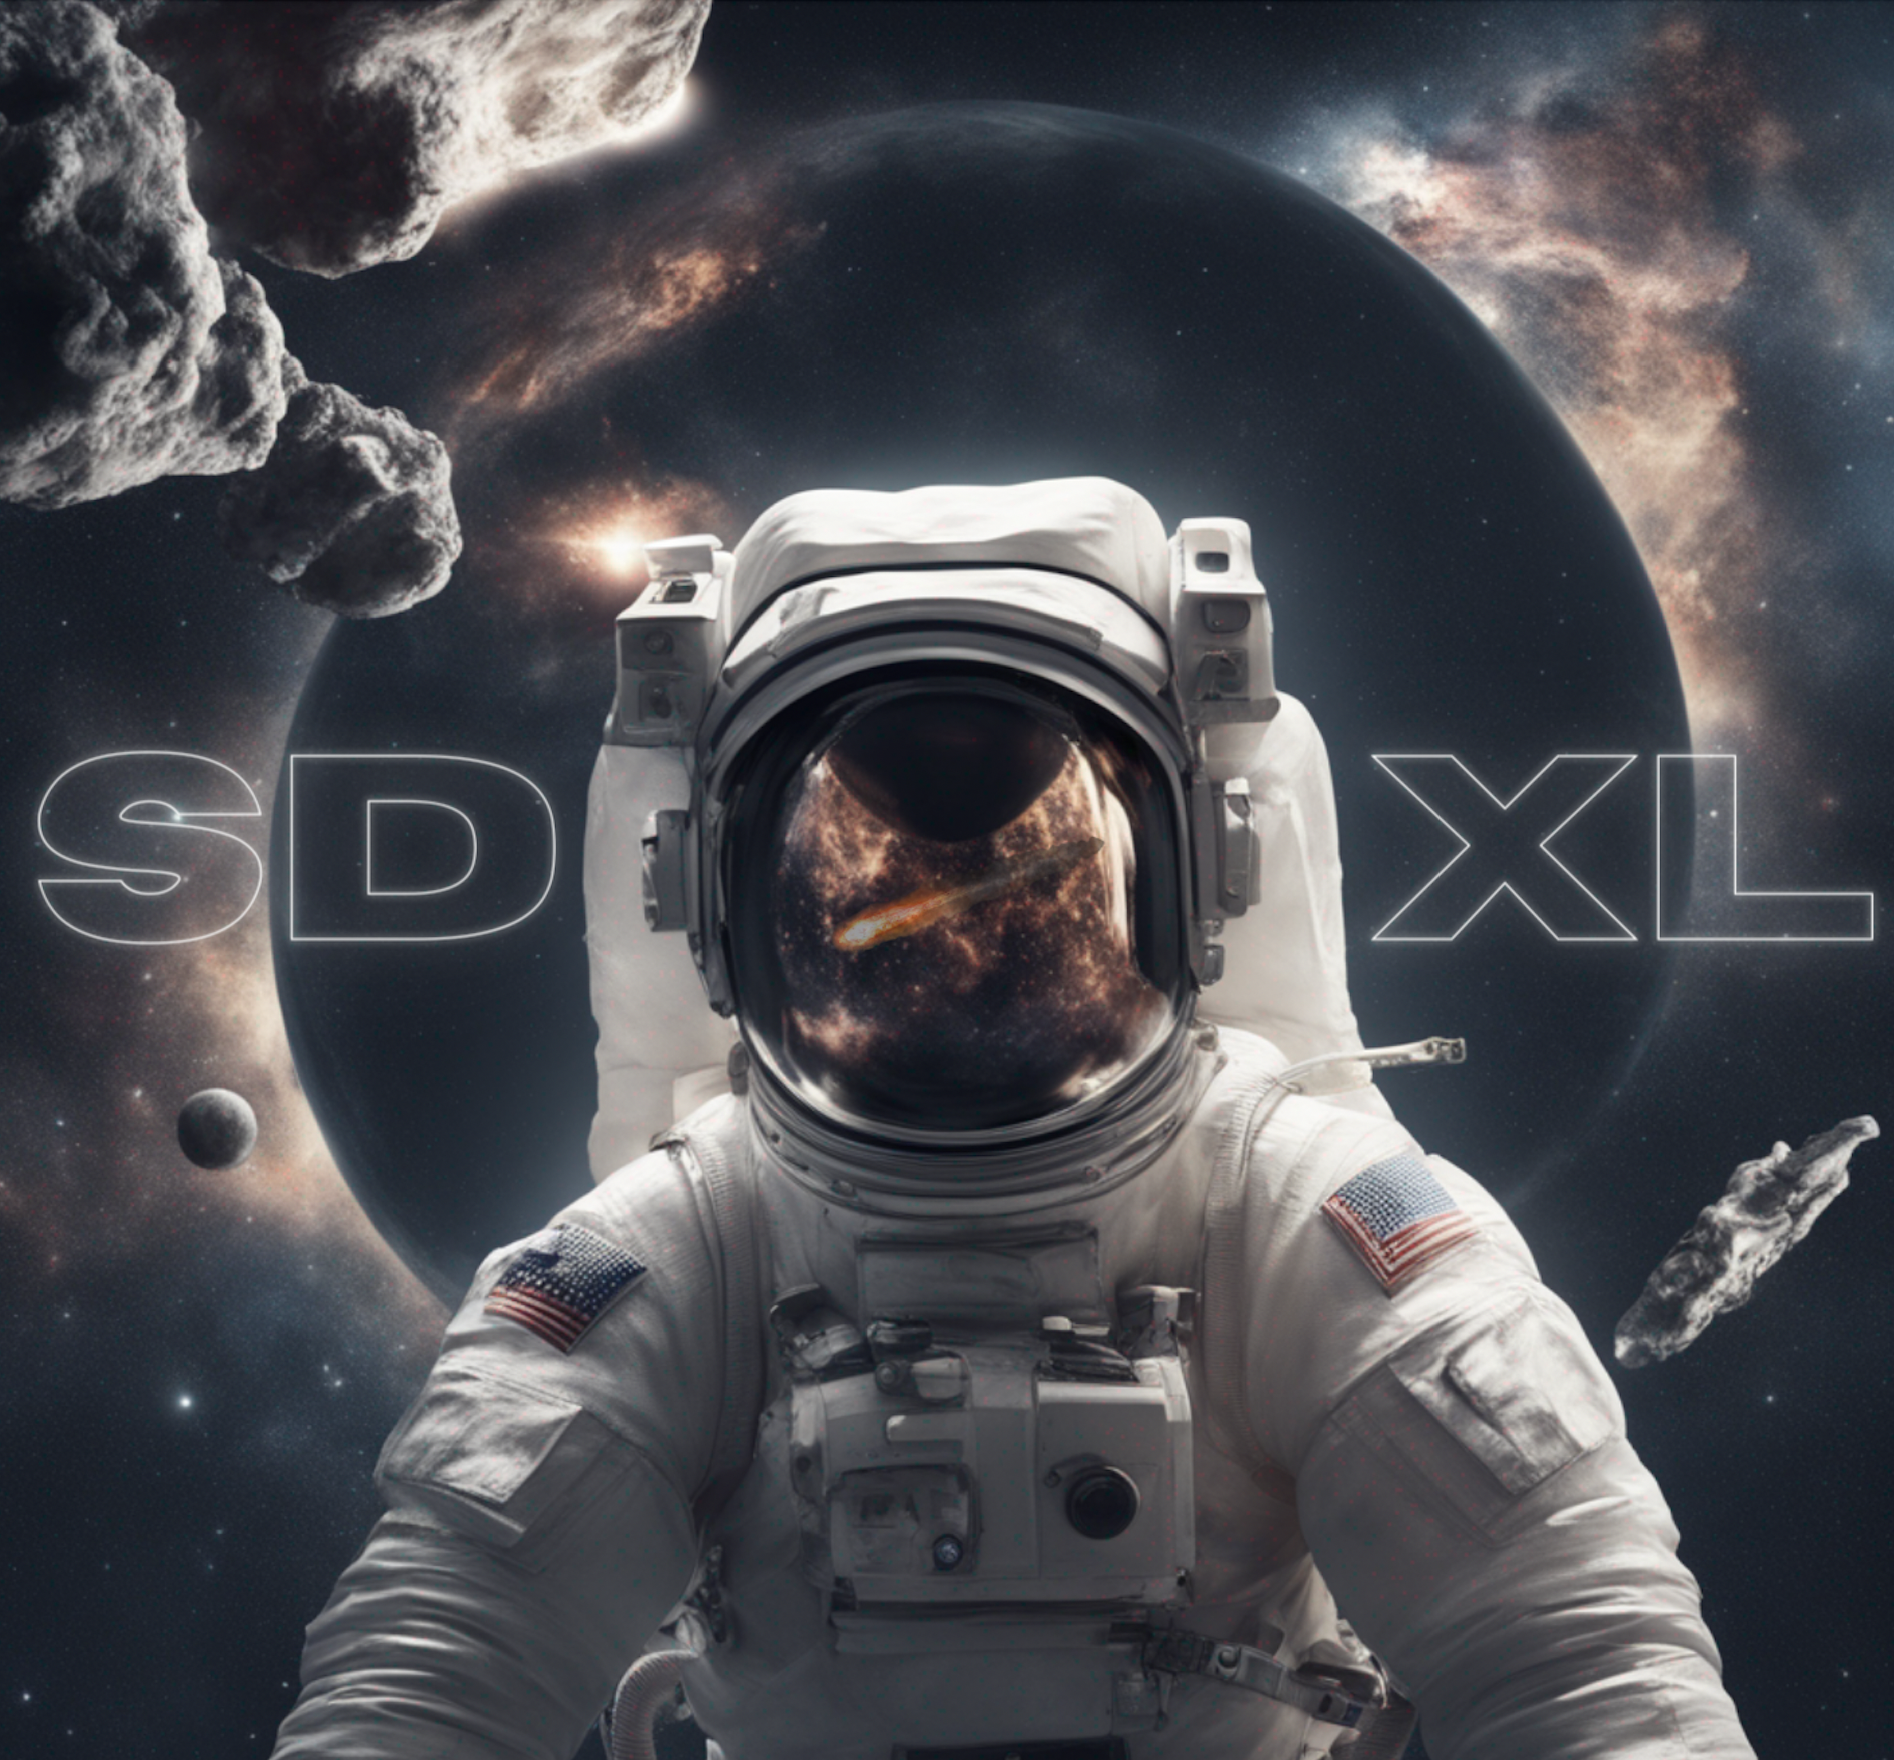 Realistic picture of an American astronaut in outerspace with planets and stars and meteorites and meteors in the background and a light halo around the astronaut. In the astronaut's helmet is the reflection of a fiery orange comet. "SDXL" is outlined in white in the background.